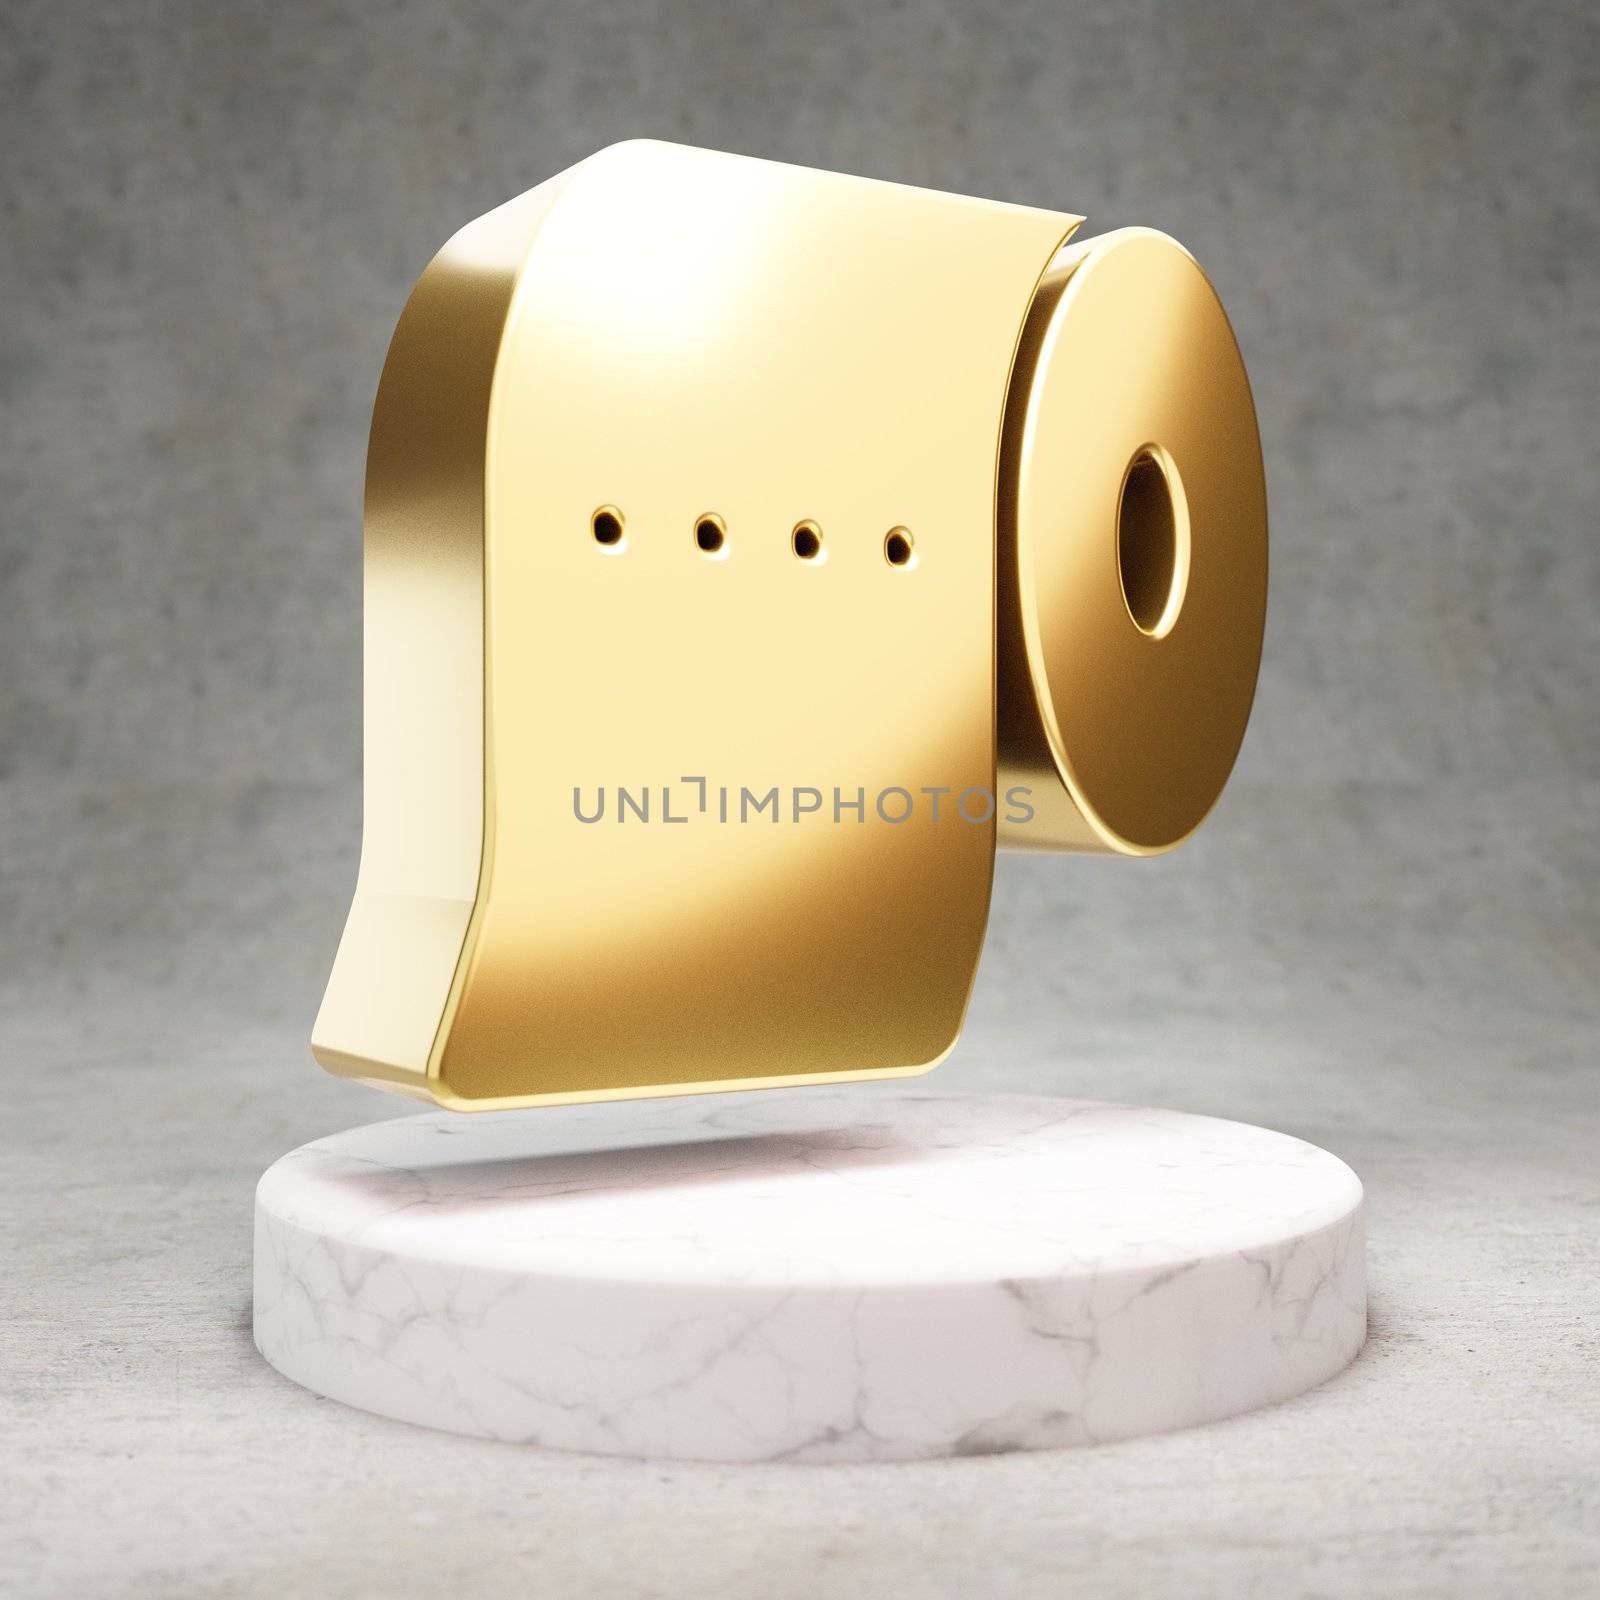 Toilet Paper icon. Gold glossy Toilet Paper symbol on white marble podium. Modern icon for website, social media, presentation, design template element. 3D render.